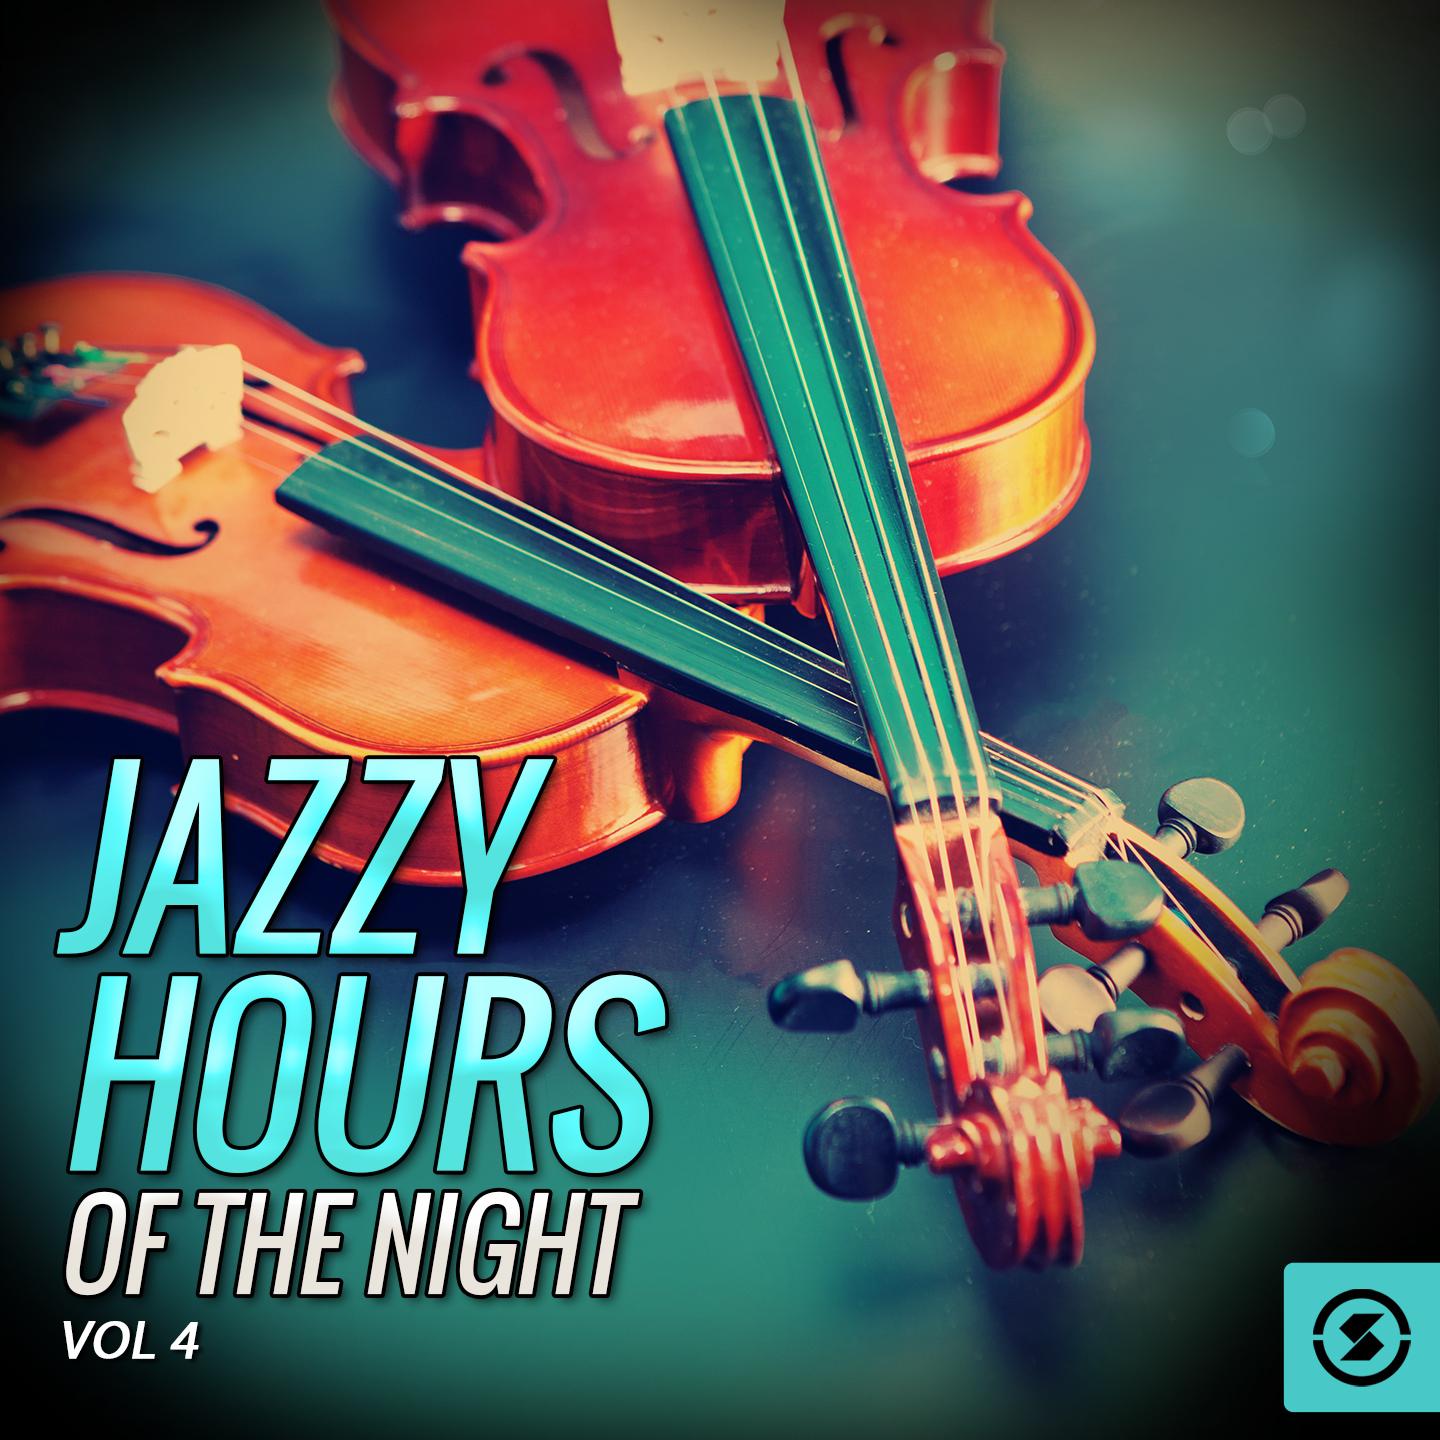 Jazzy Hours of the Night, Vol. 4